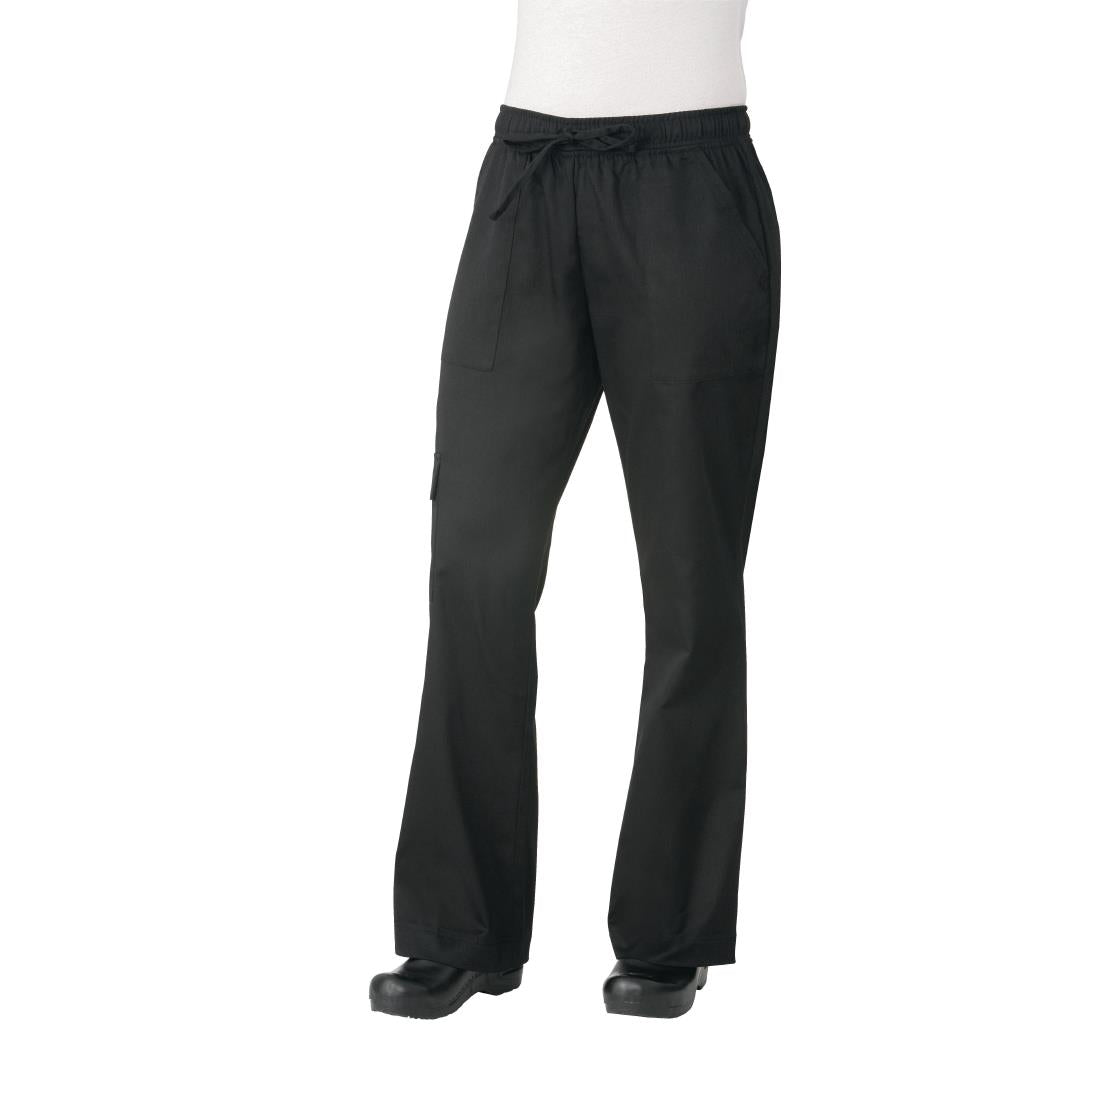 B630-S Chef Works Womens Cargo Chefs Trousers Black S